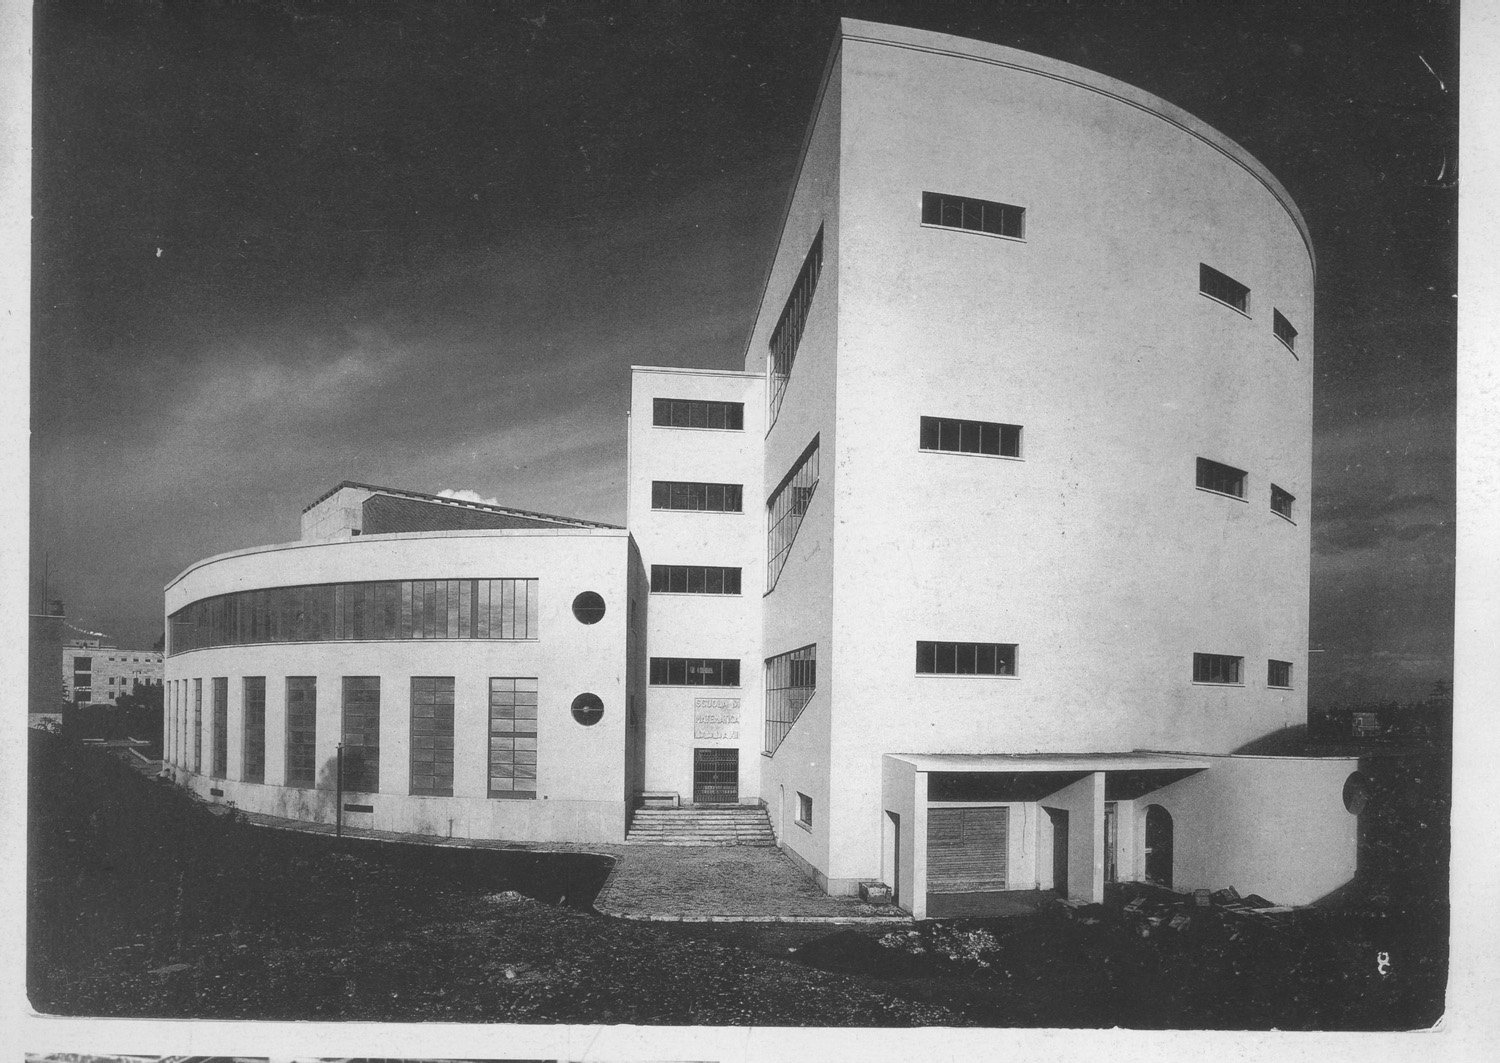 School of Mathematics, Roma, Sapienza University campus, Gio Ponti, the library in 1935. Copyright: From L. Licitra Ponti, Gio Ponti, l’opera, 1990, © Gio Ponti Archives